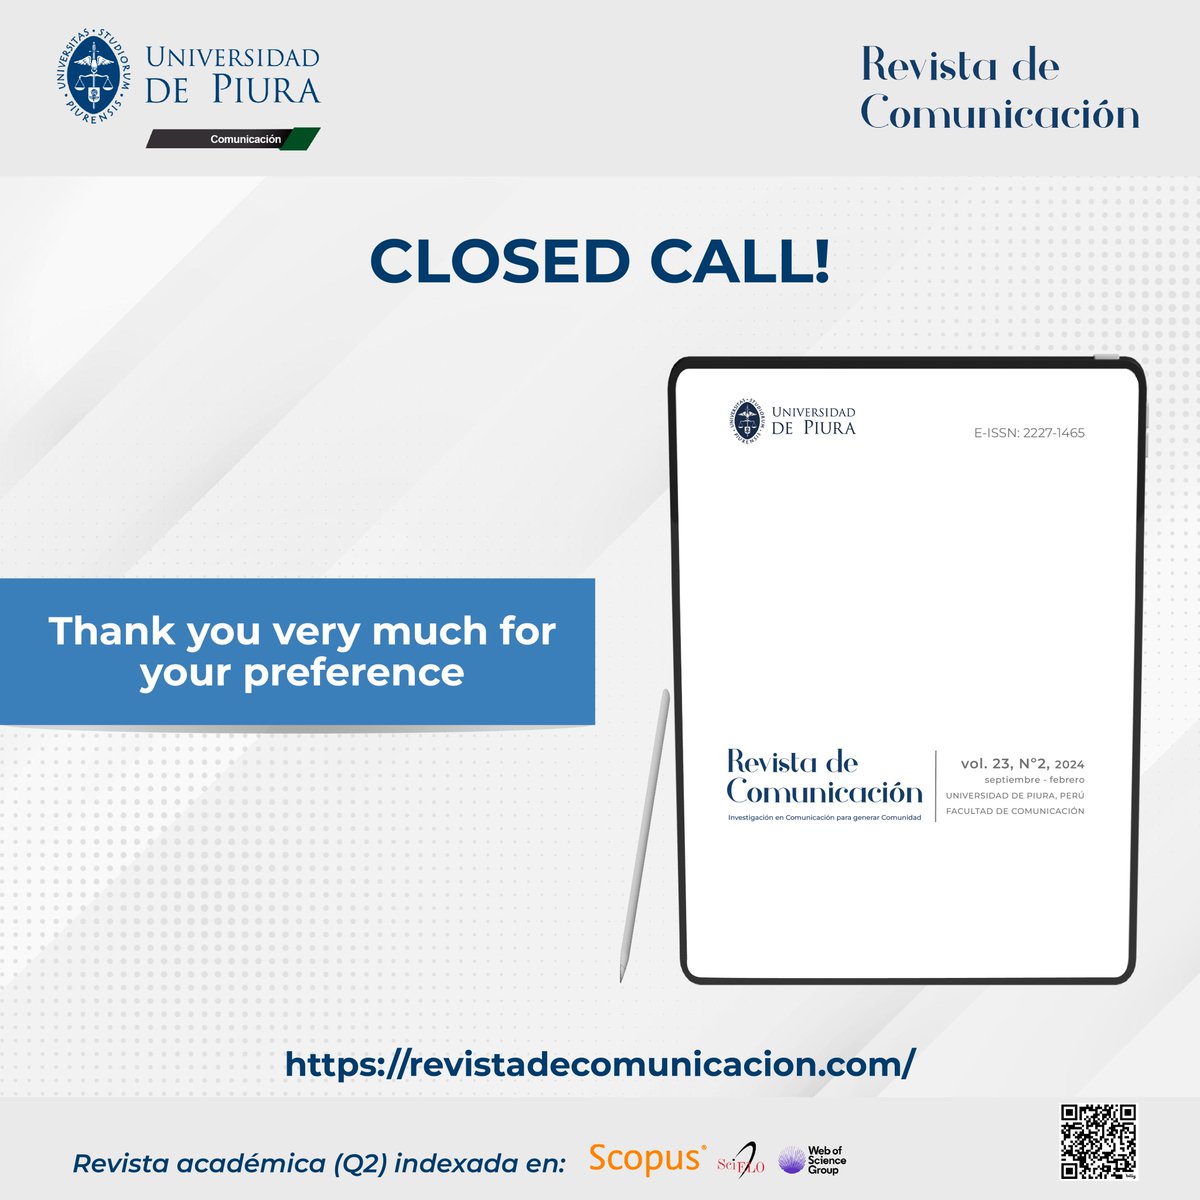 📝The call for the next issue of the Revista de Comunicación is closed. ➡ The Consejo Editorial will realize the first review of the manuscripts received within 30 days after the closing date of the call. #Rcom #Fcom #Udep